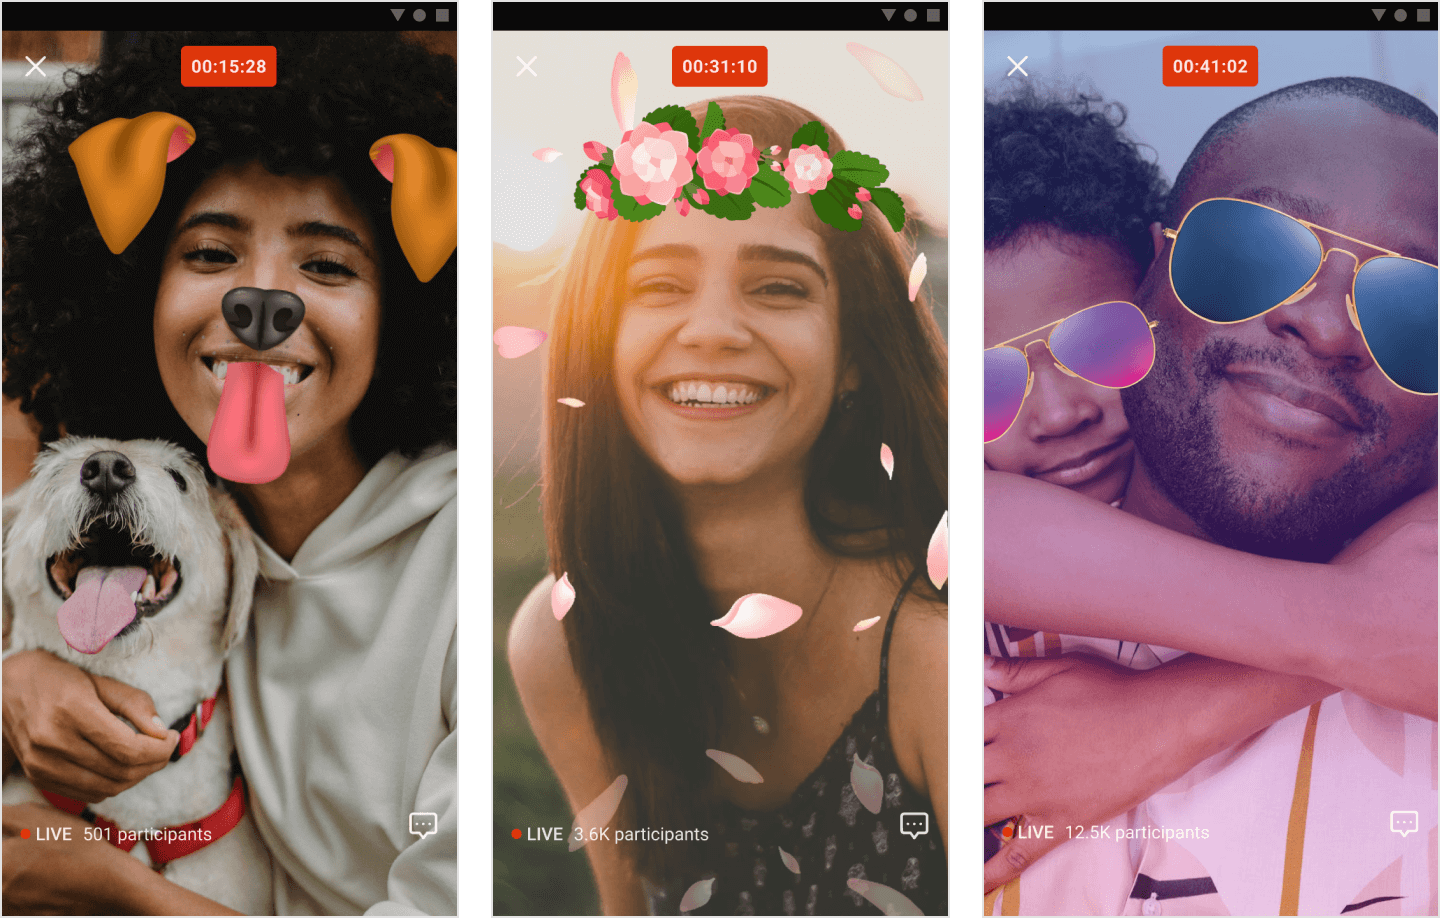 Image|Examples of participant view with face filters